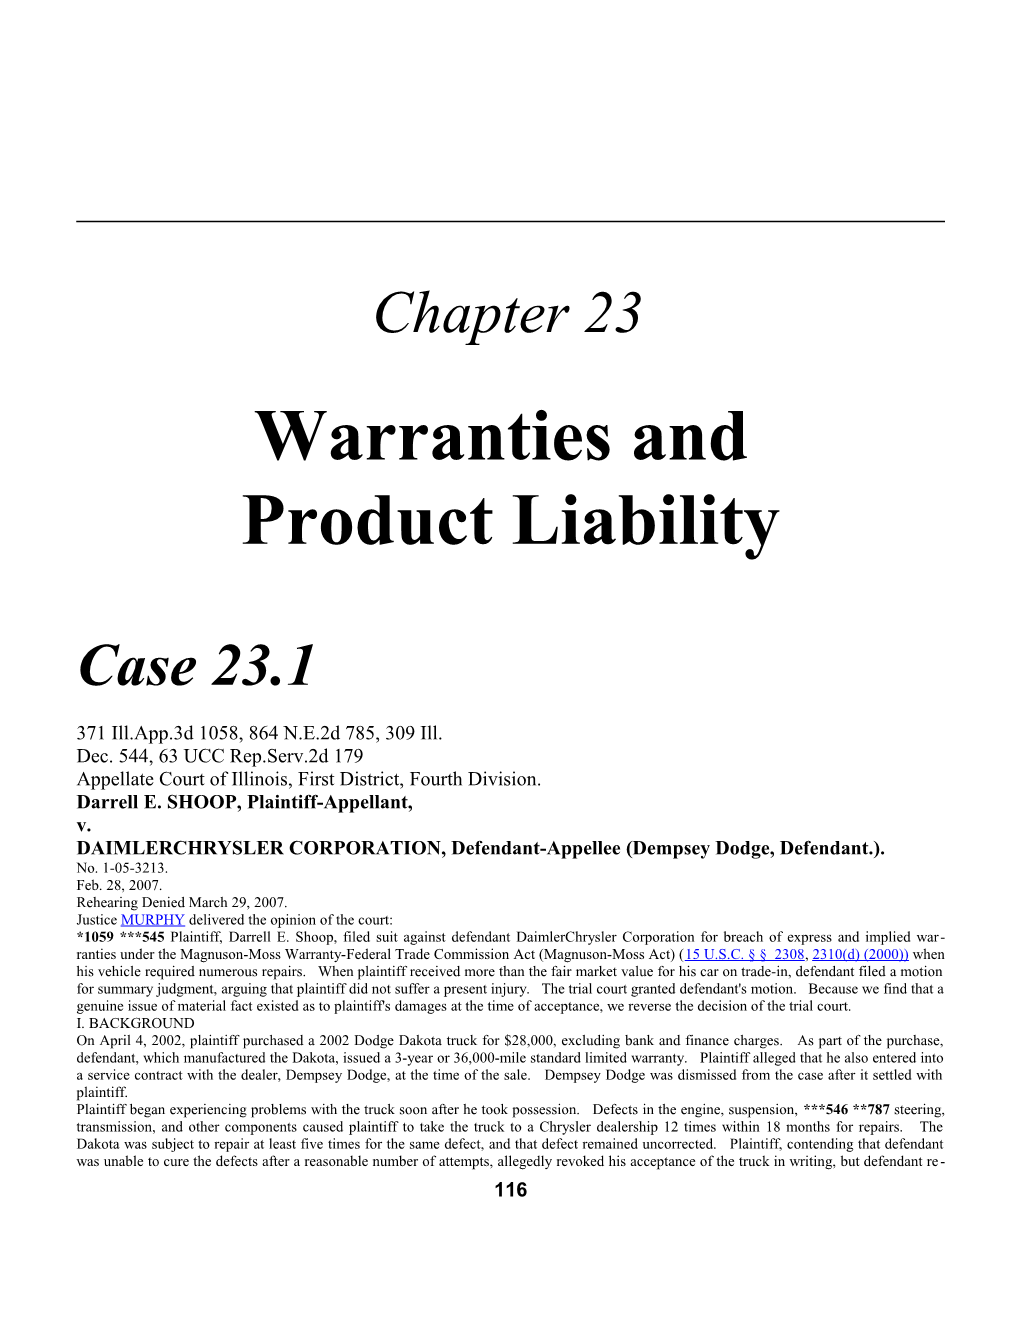 Chapter 23: Warranties and Product Liability 1